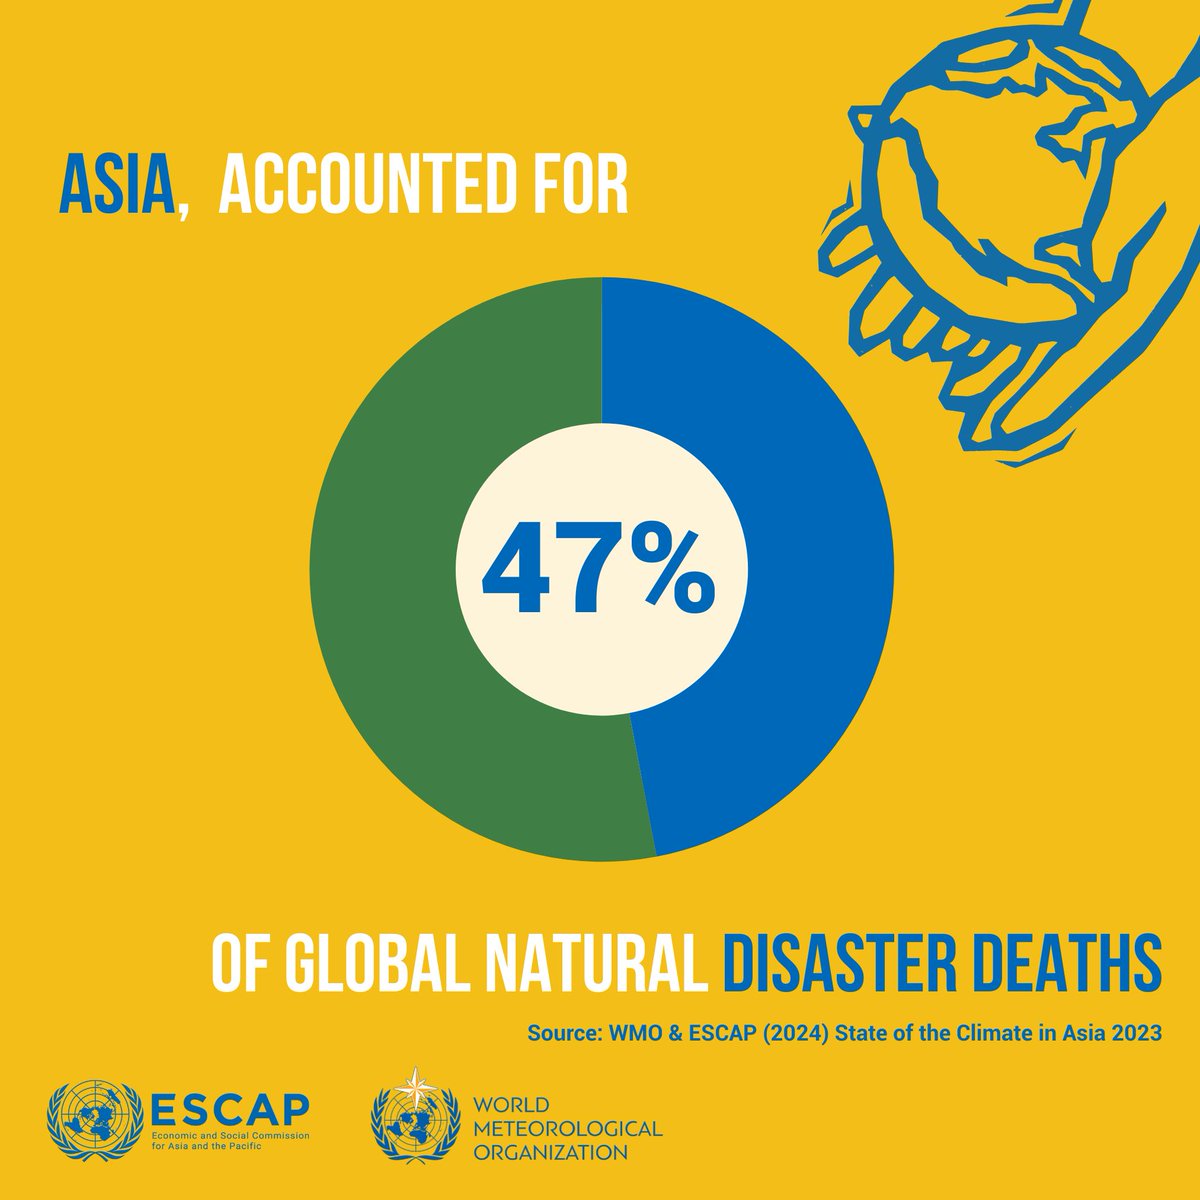 🔥 Asia hit hardest by #ClimateChange and extreme weather! ⚠️ To save lives and prevent crises, stronger #EarlyWarningsForAll systems are vital. Learn more details about climate crisis here 👉 buff.ly/49VcXlP @WMO @UNESCAP #EW4All